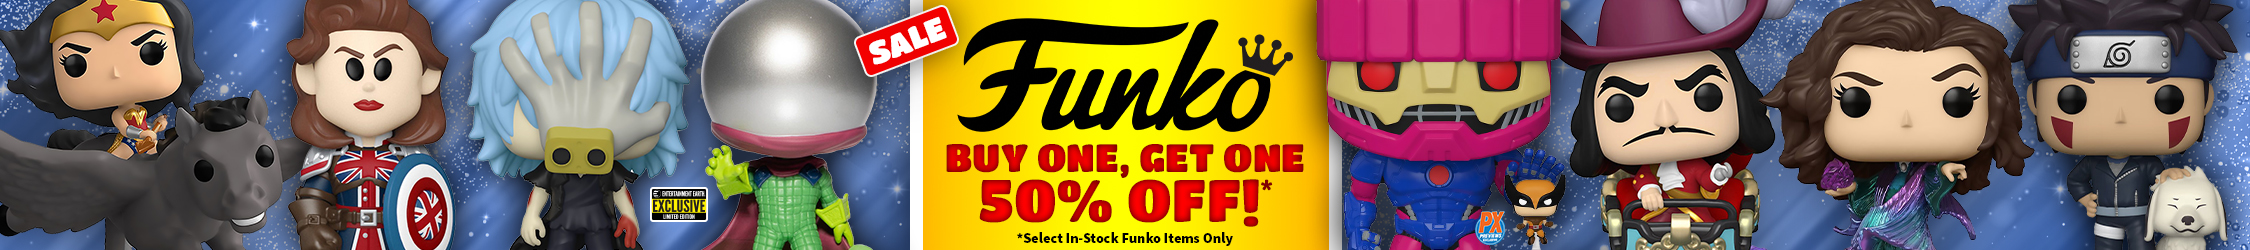 Buy One, Get One 50% Off on Select In-Stock Funko